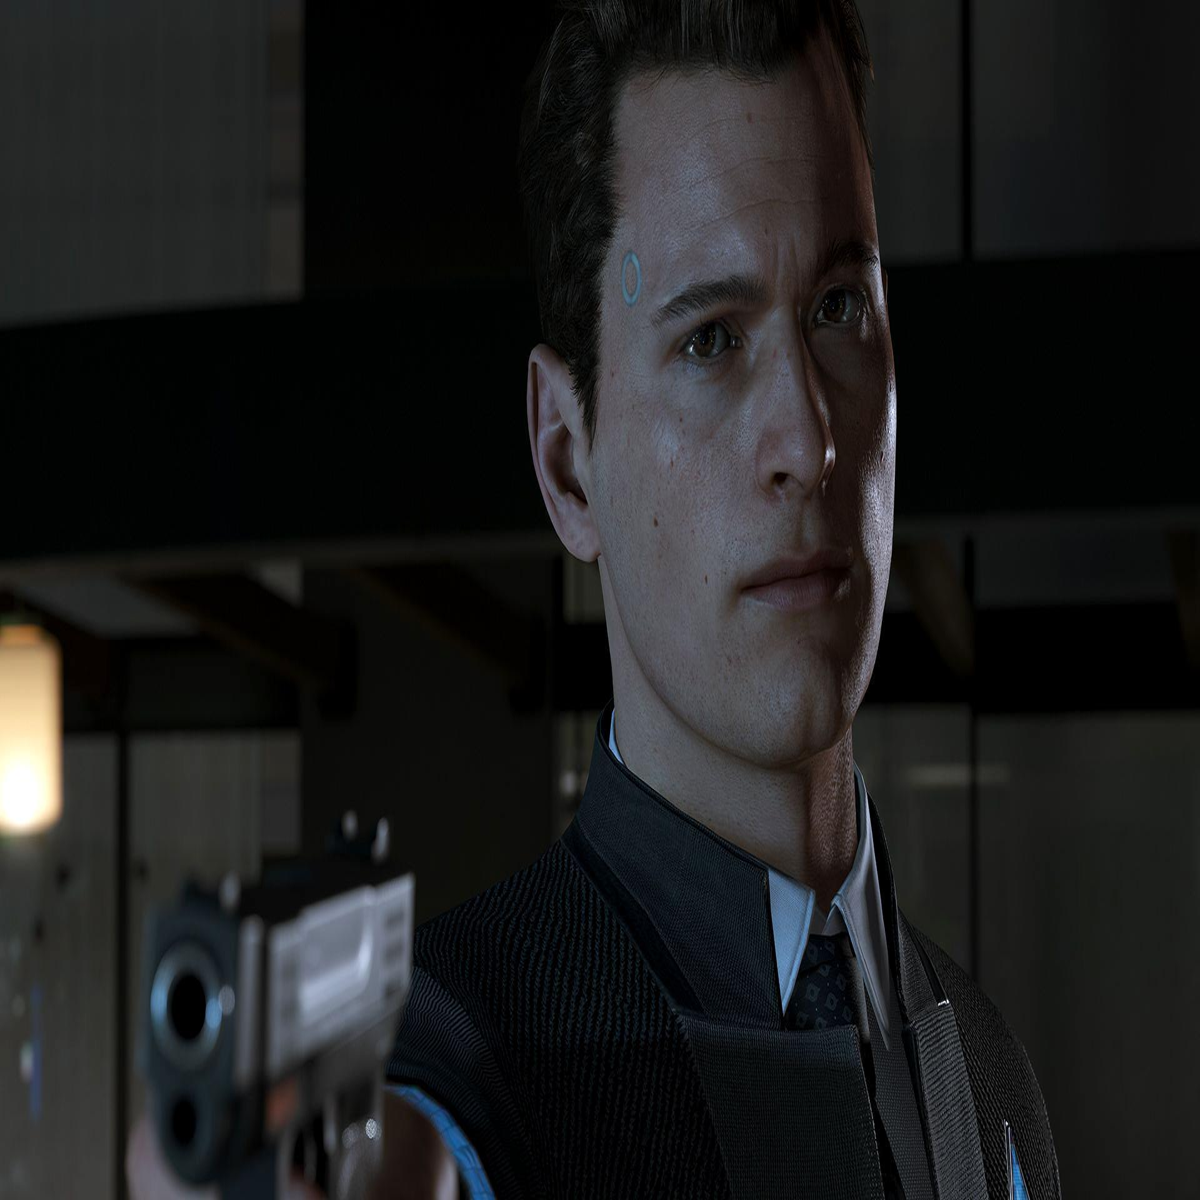 Detroit: Become Human Video Game Preview: A Stunning Demo